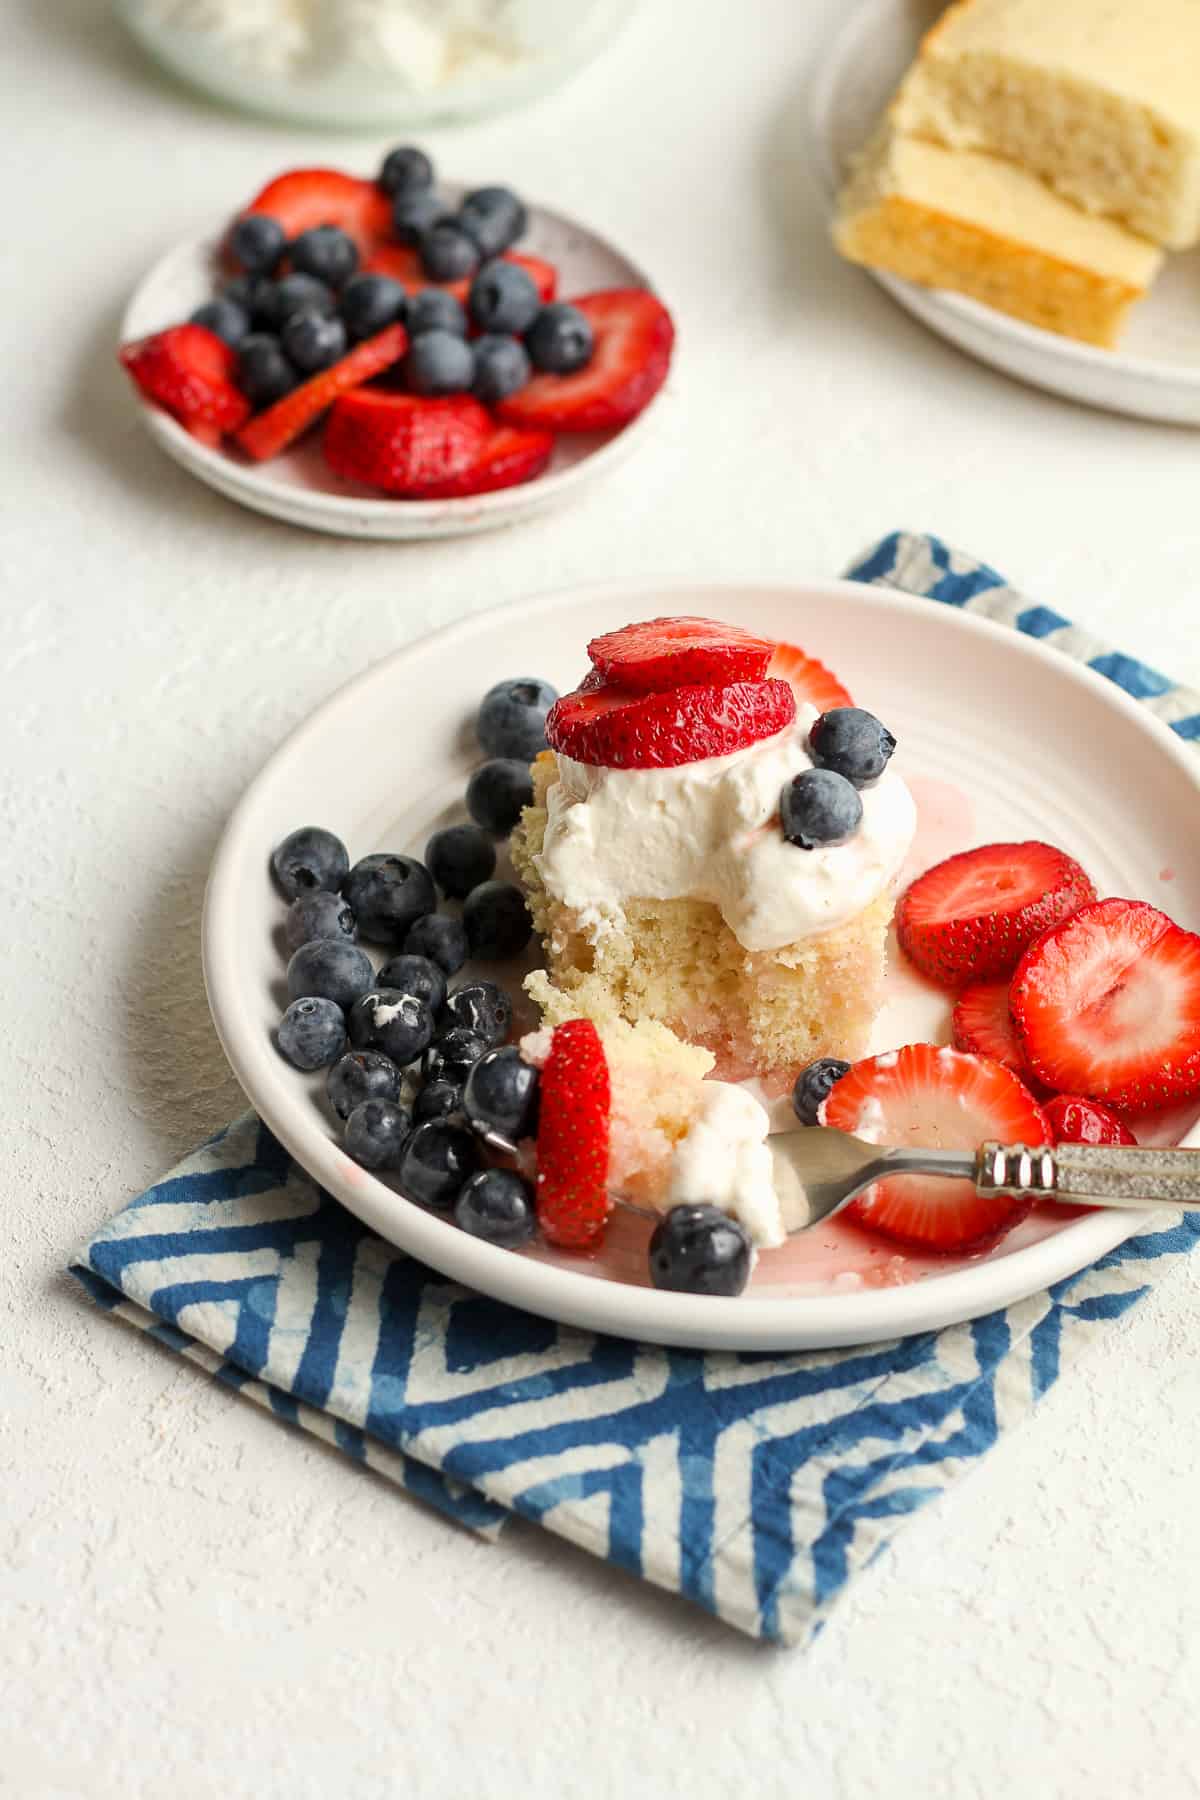 Side view of a plate of strawberry shortcake with blueberries.